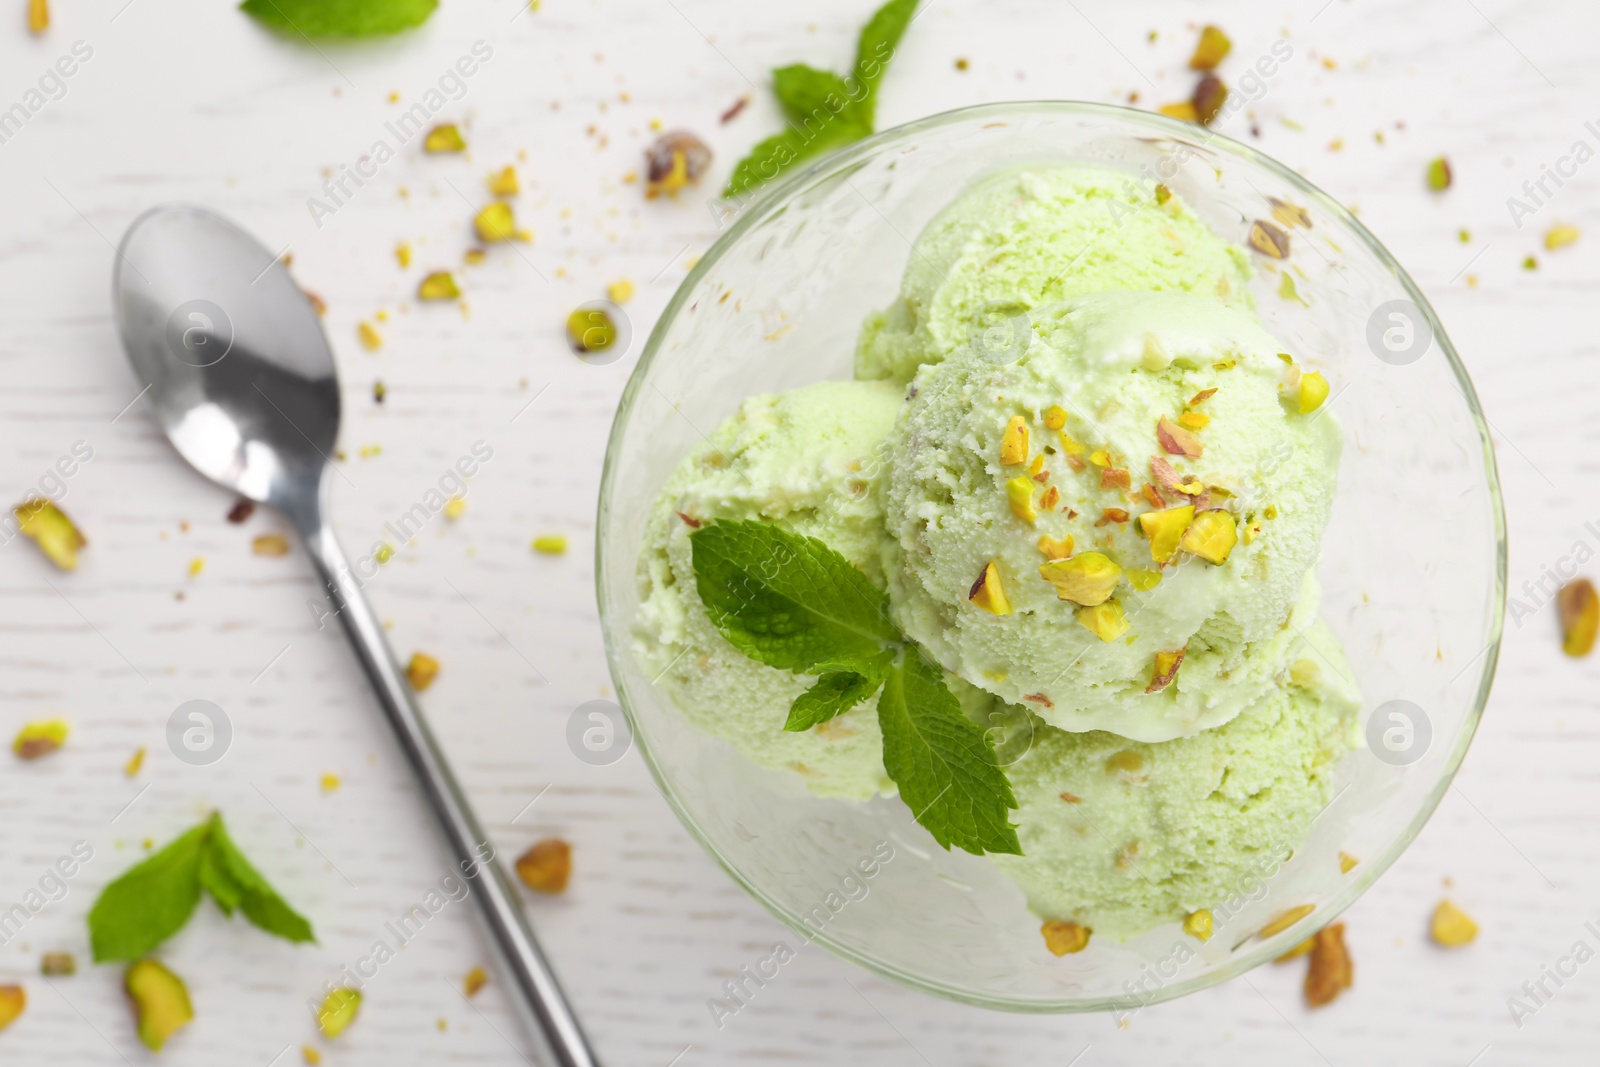 Photo of Delicious green ice cream served in dessert bowl on white wooden table, top view